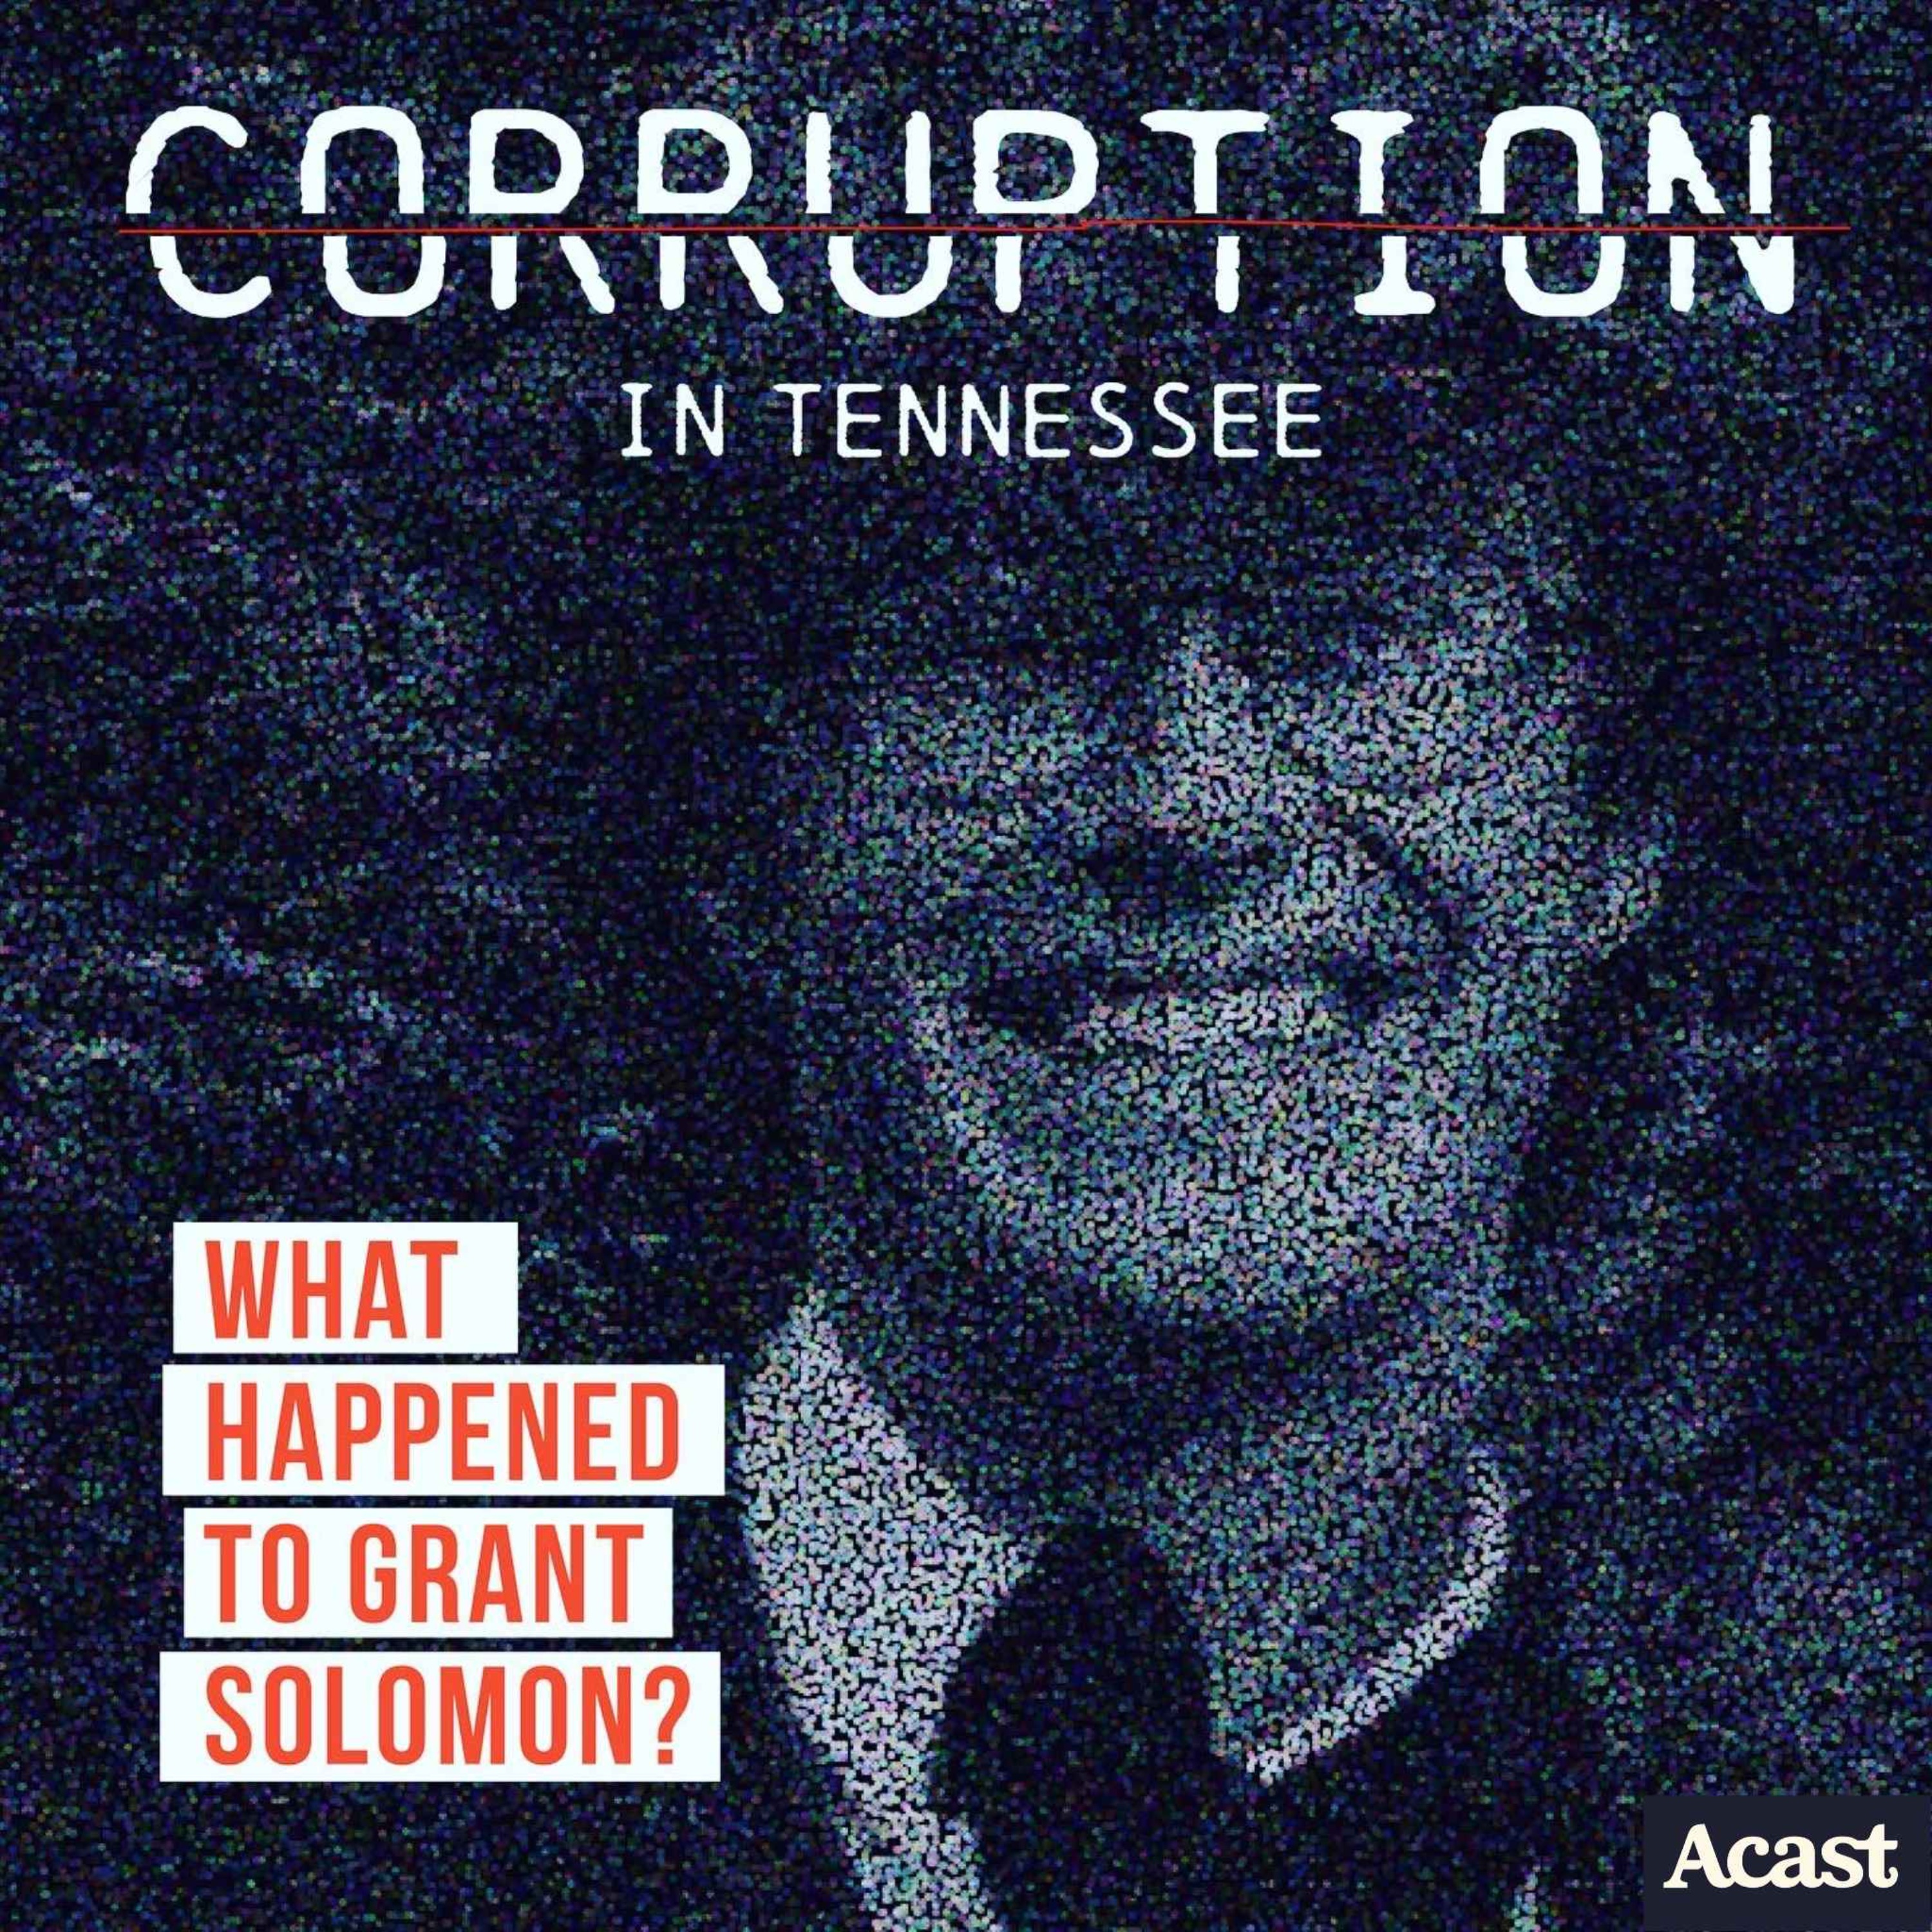 cover art for Gracie's Story, plus an open letter to Tennessee Governor Bill Lee